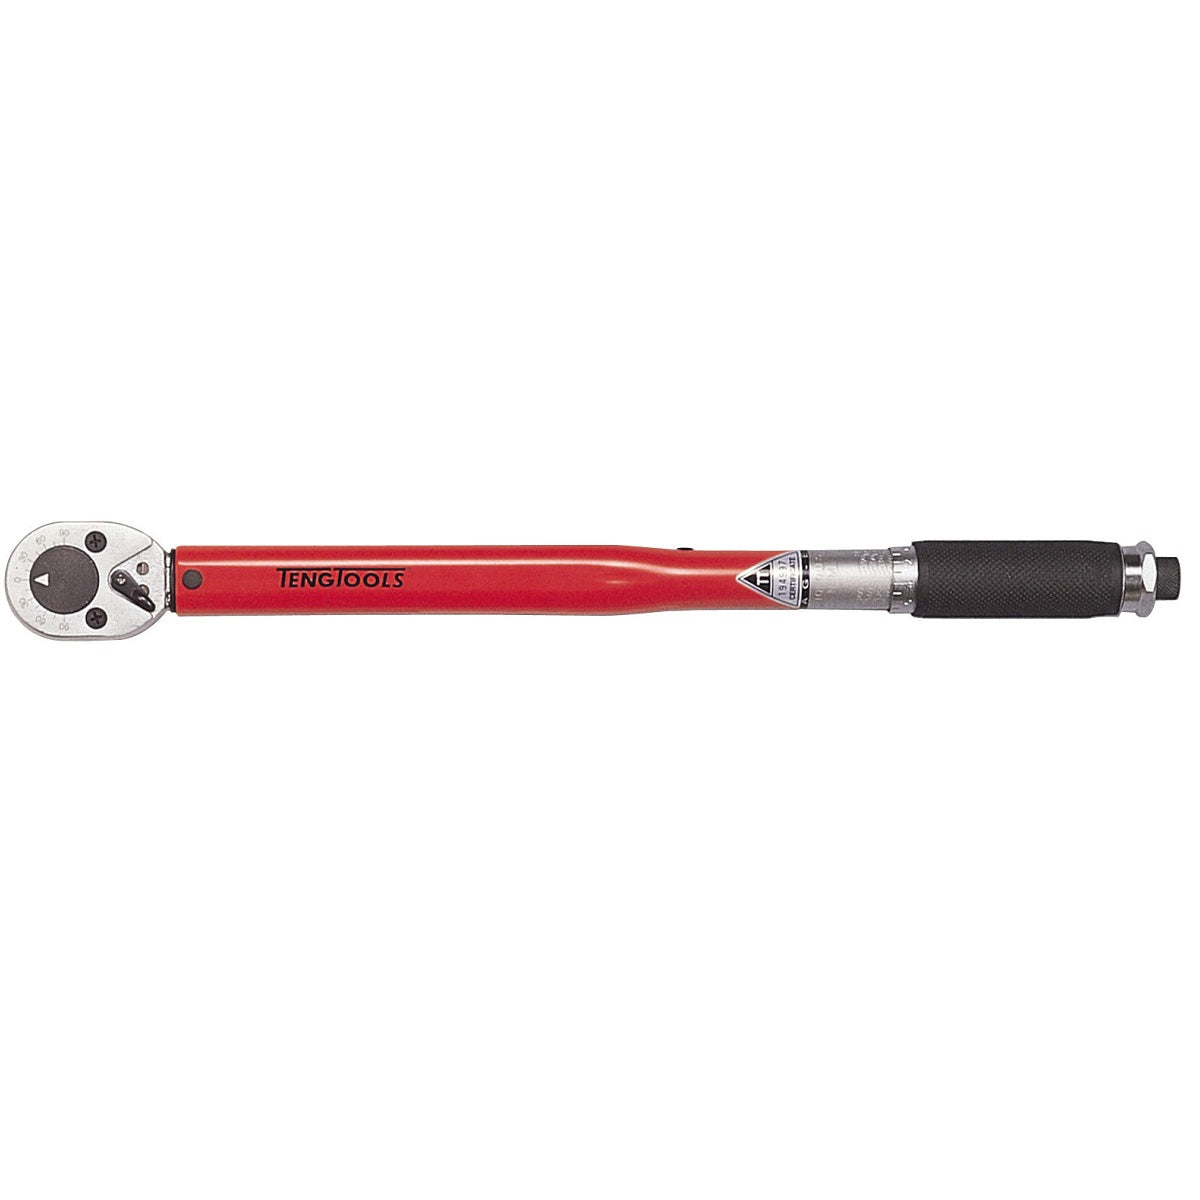 Teng Tools 1292AG-E4 Torque Wrench 1/2" Drive 70-350Nm